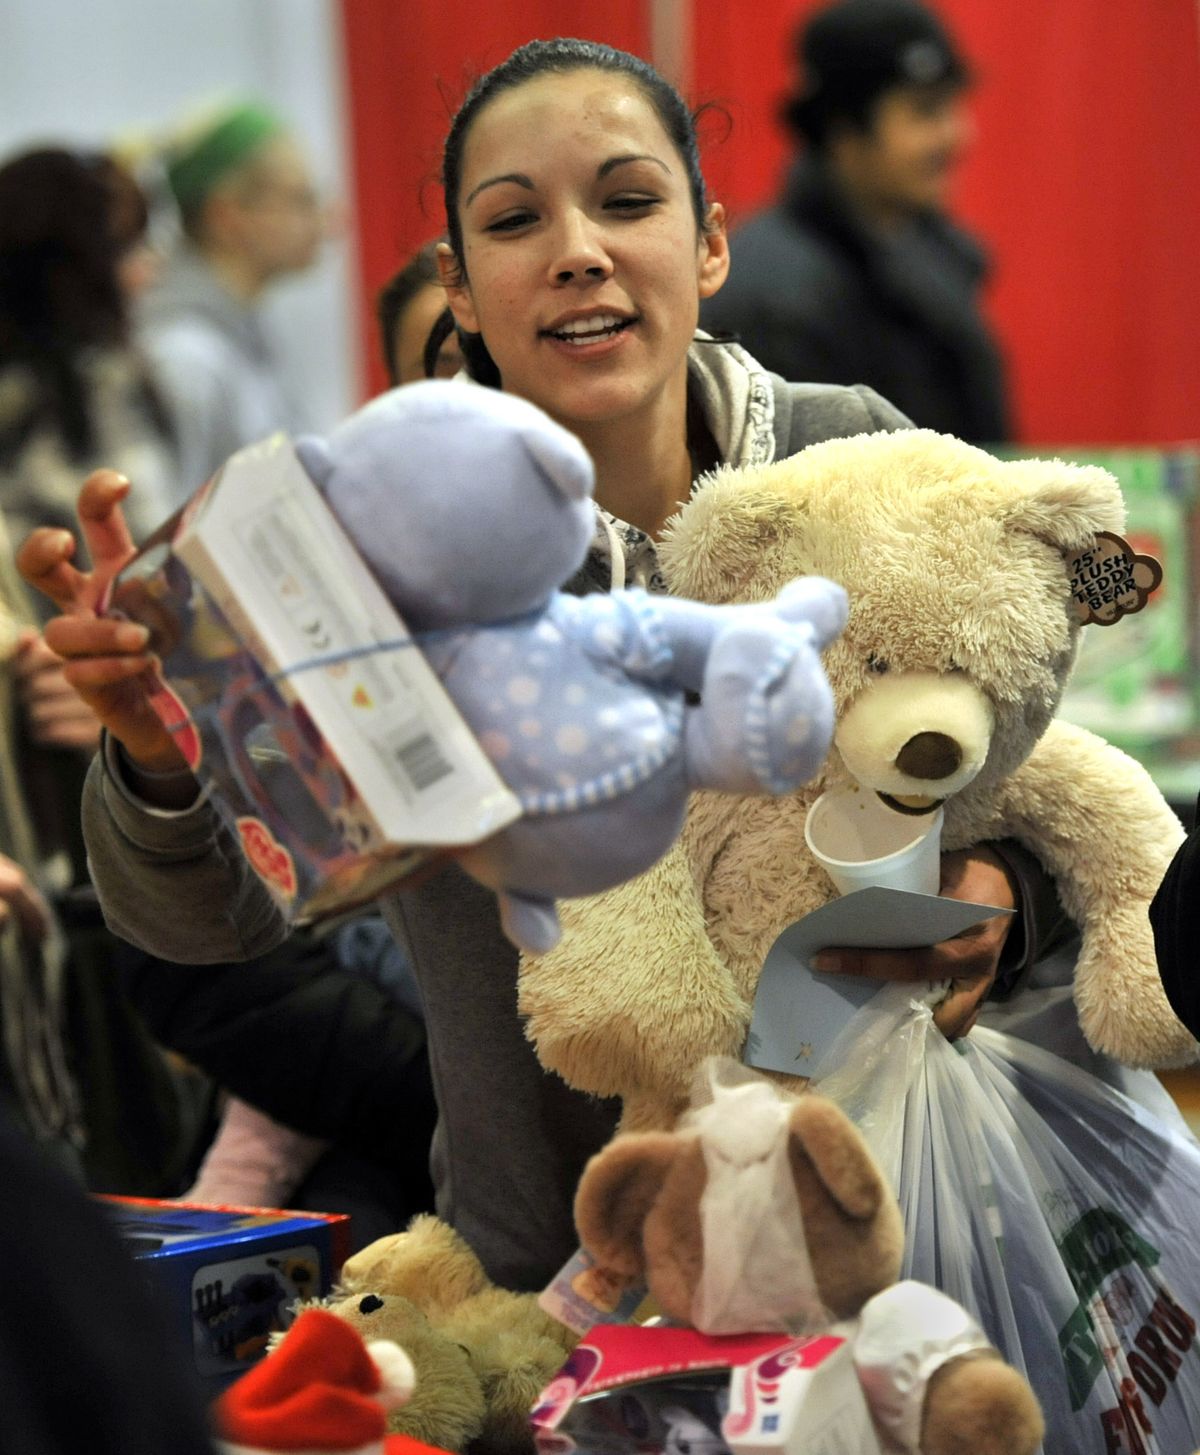 Stephanie Marl, 30, of Spokane, had a hard time deciding which teddy bears to choose for her four children. Marl made her way through the Christmas Bureau’s toy room on Tuesday, the final day of operation at the Spokane County Fair and Expo Center. (Dan Pelle)